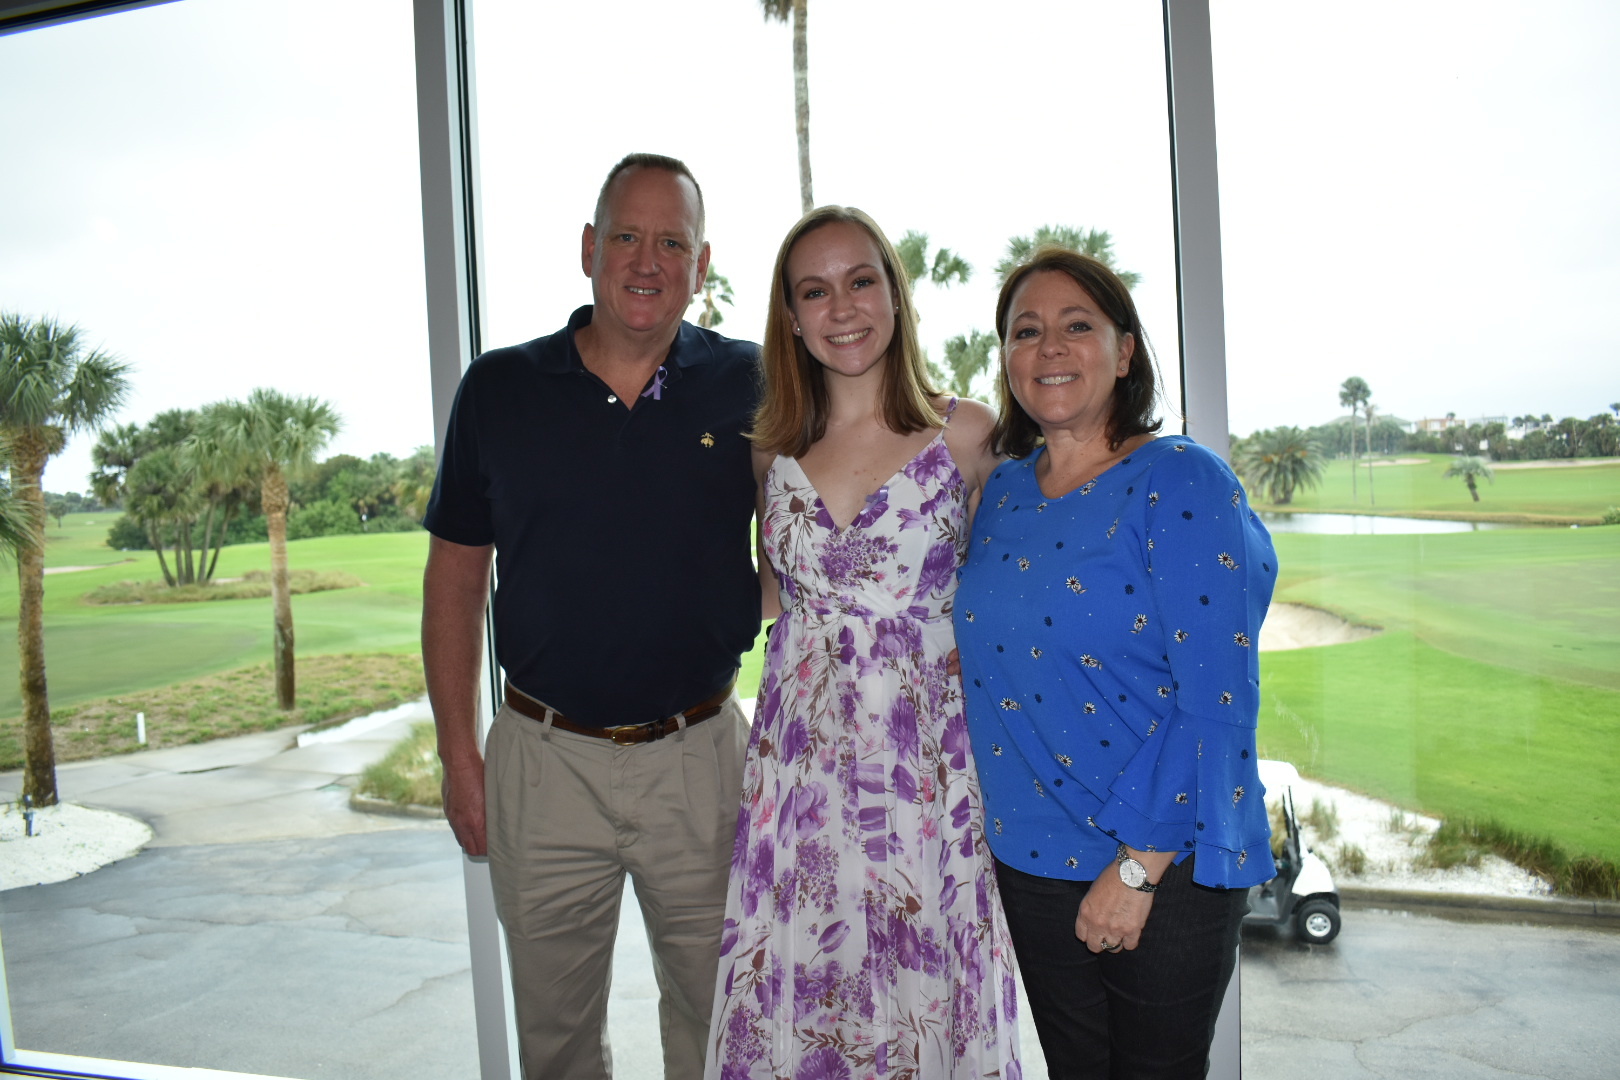 Taylor Olsen with her parents John and Carol at the Dressember Tea on Jan. 4. Courtesy photo